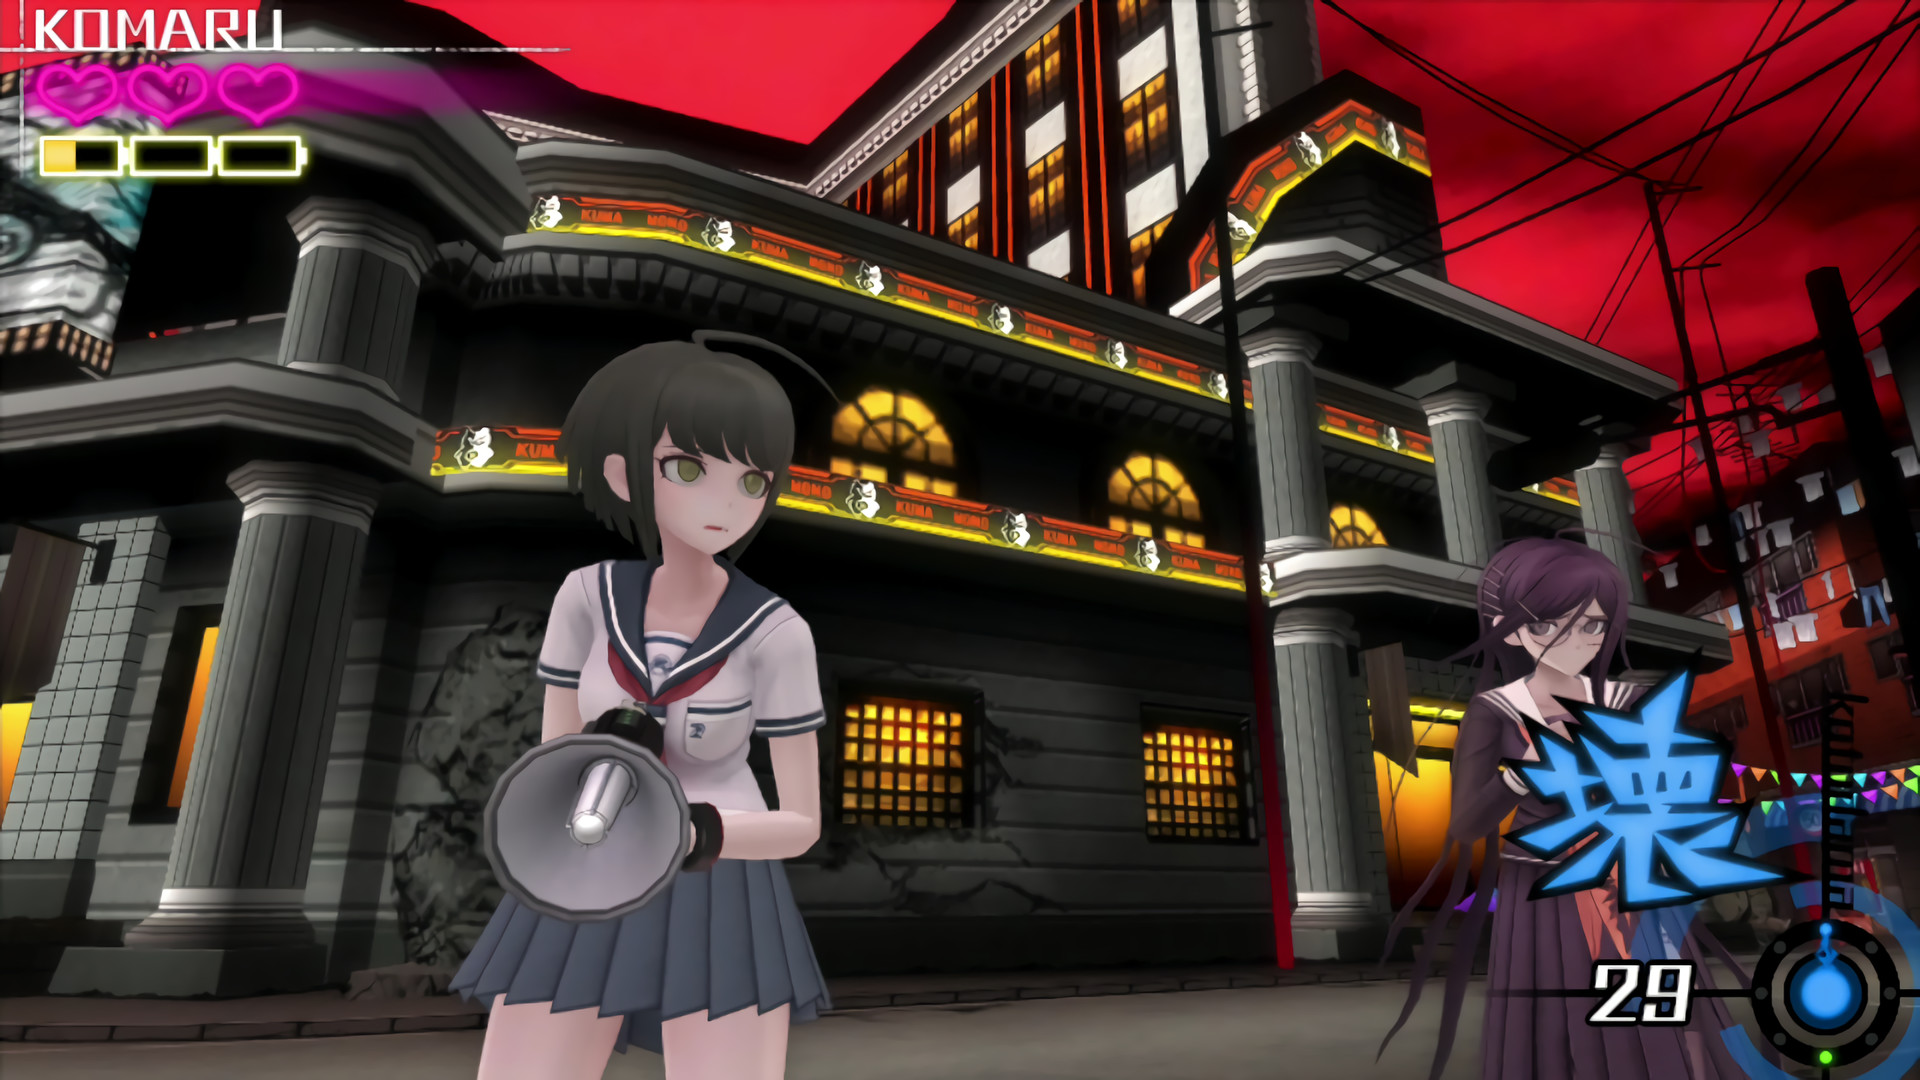 Danganronpa Another Episode: Ultra Despair Girls free full pc game for Download